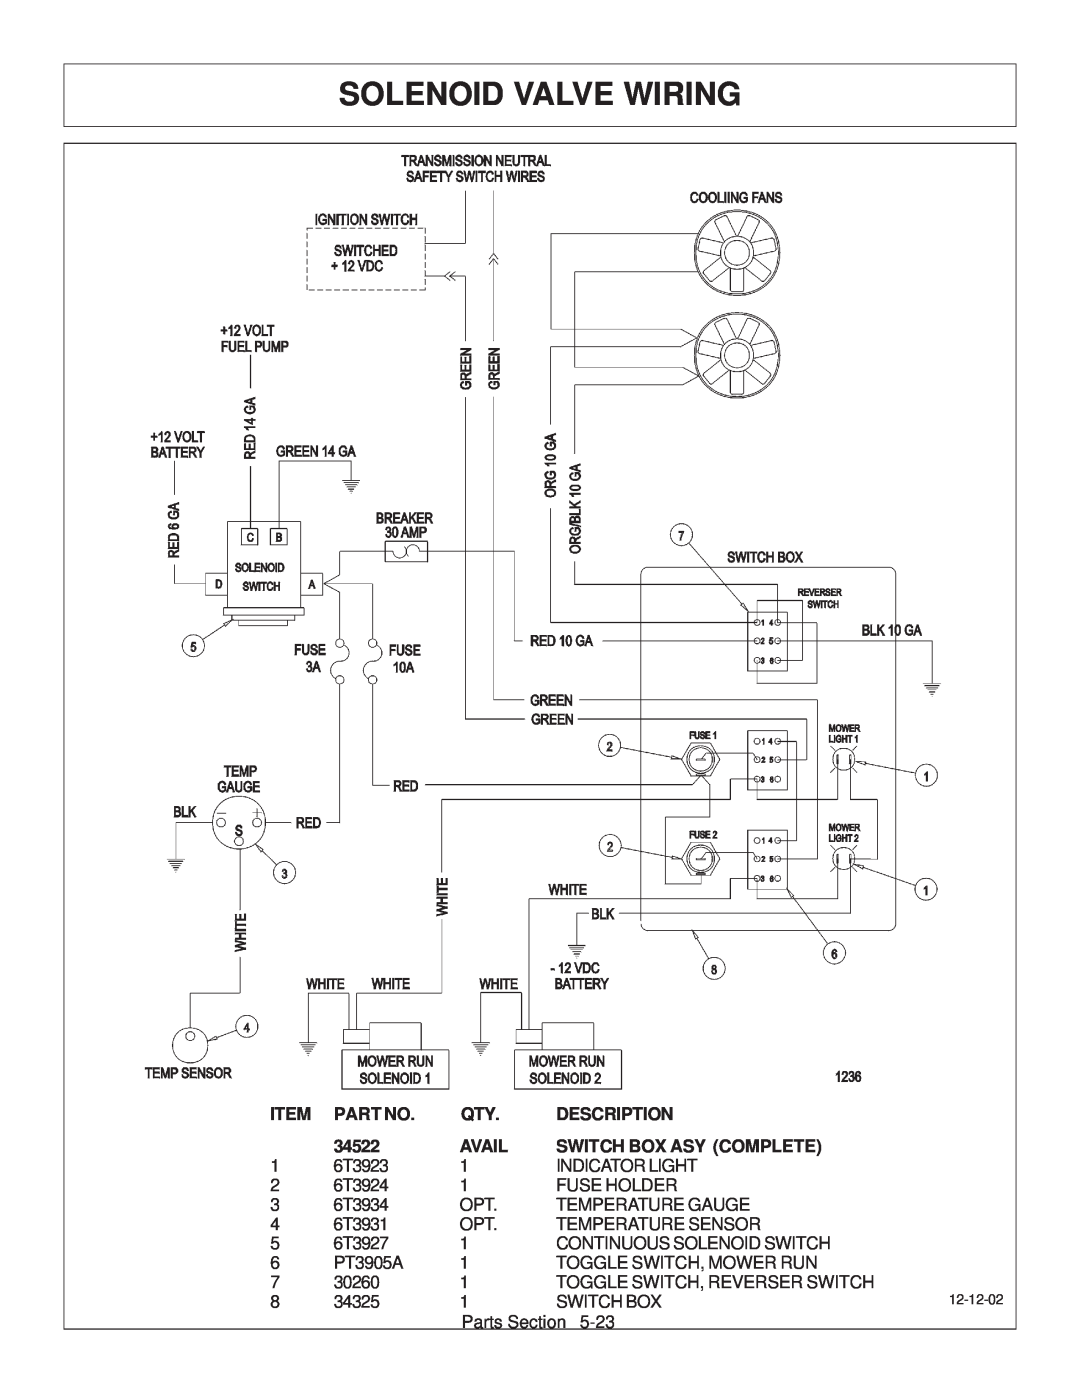 Tiger Products Co., Ltd JD 72-7520 manual Solenoid Valve Wiring, Description, 34522, Avail, Switch Box Asy Complete 